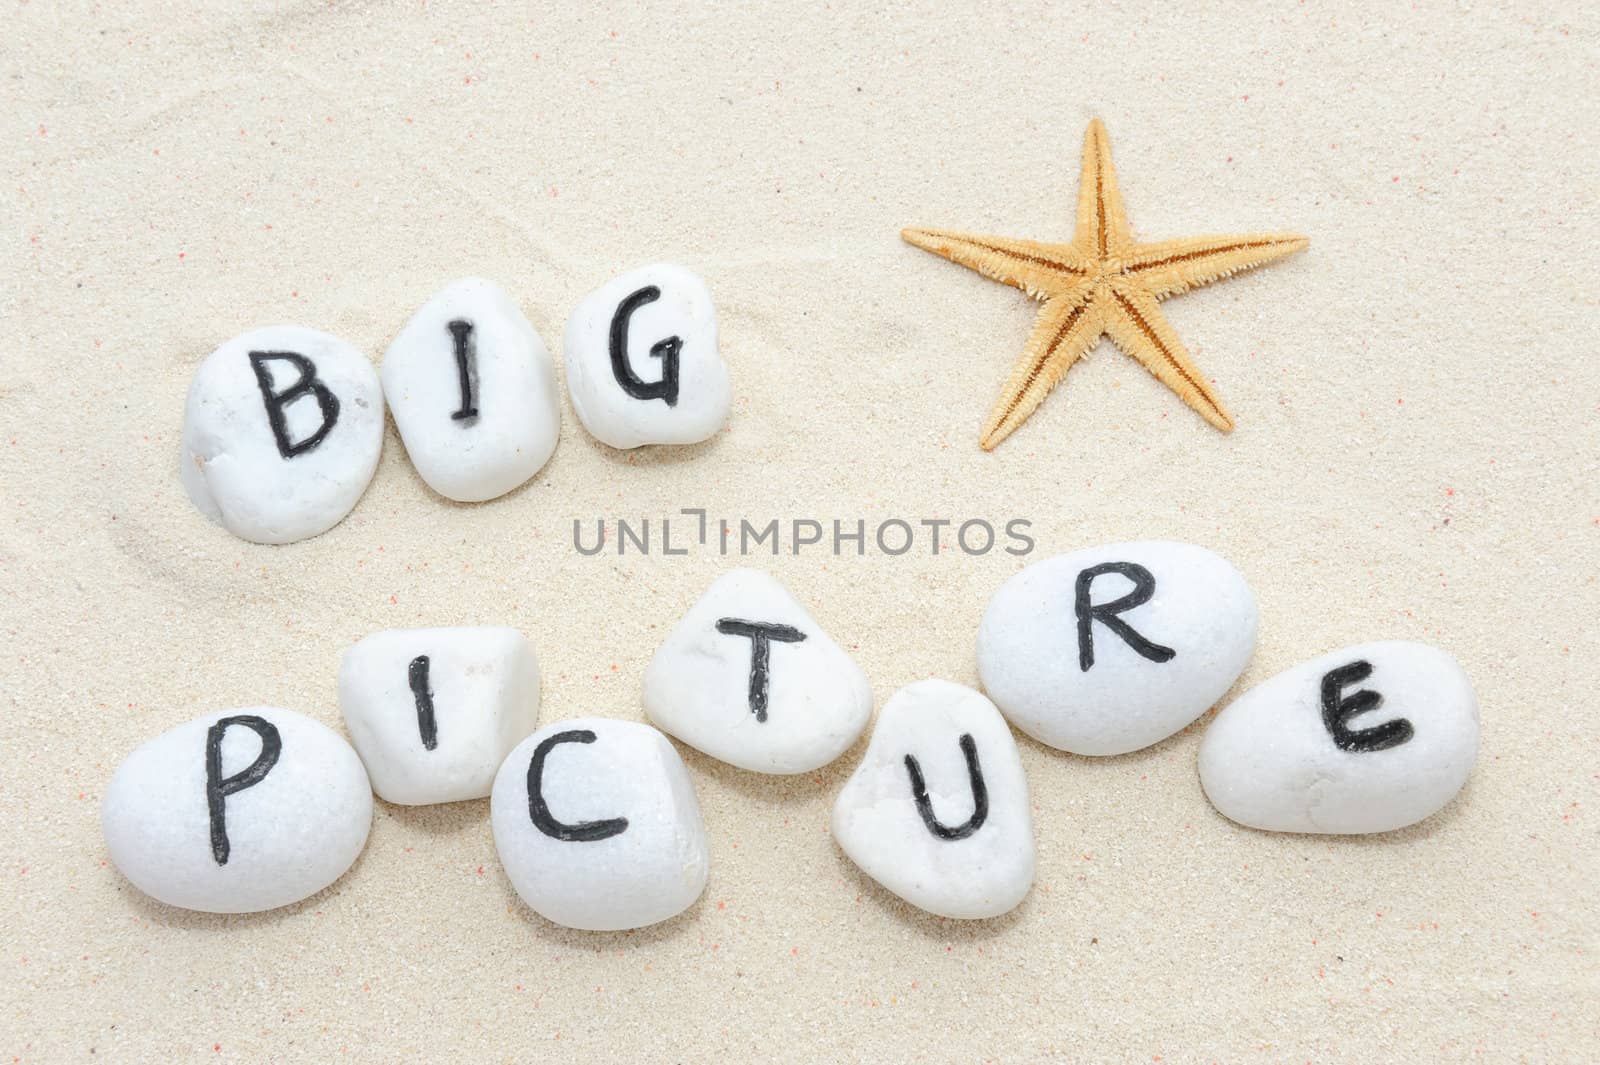 Big picture words on group of stones with sand background